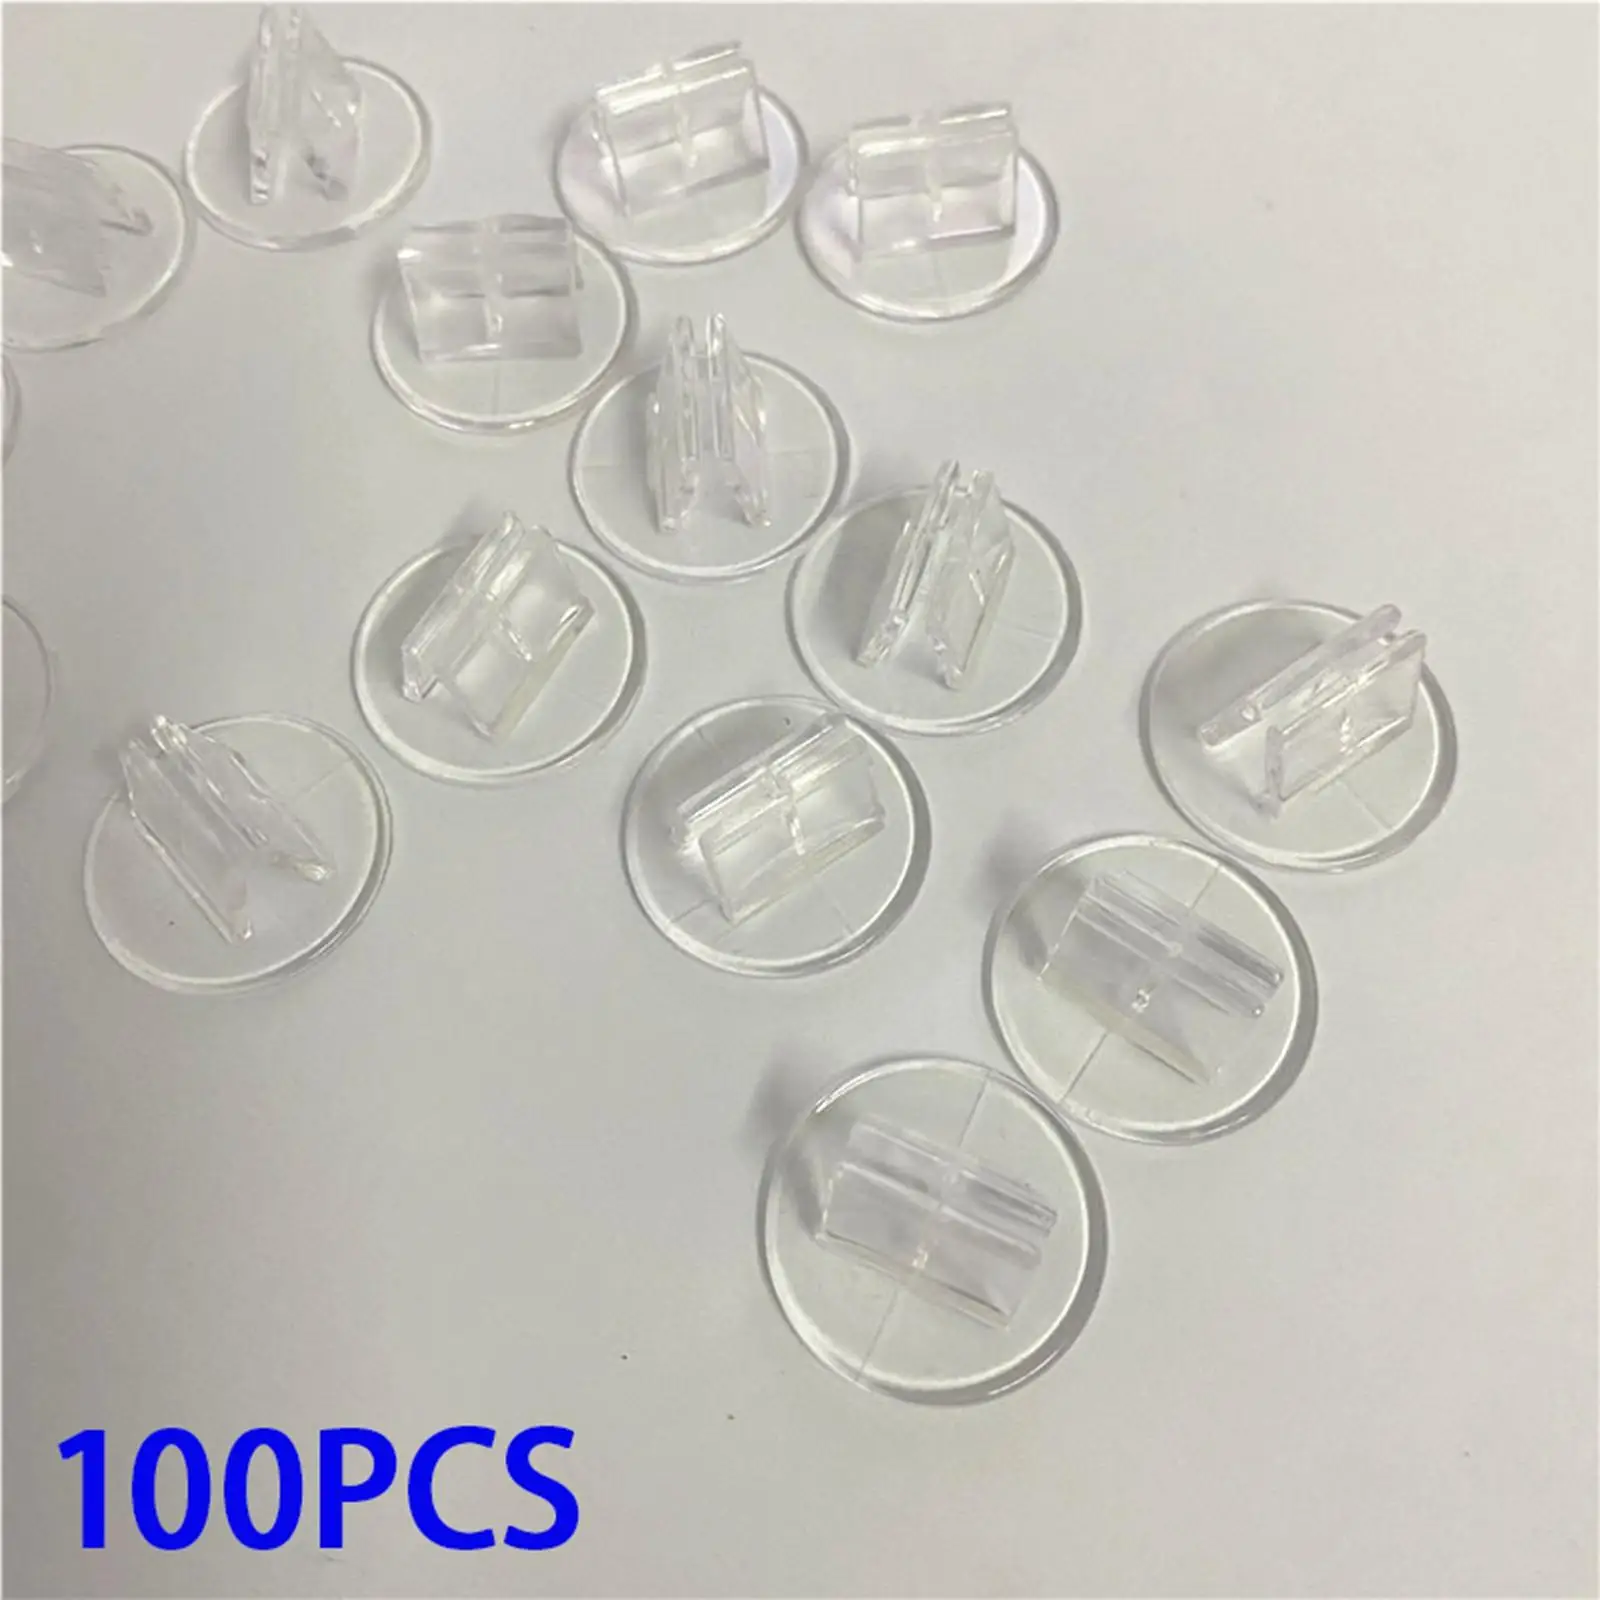 Clear Cards Holder Game Pieces Stand Cards Clip Transparent Fixed Props Card Holder for Labels Pictures Business Cards